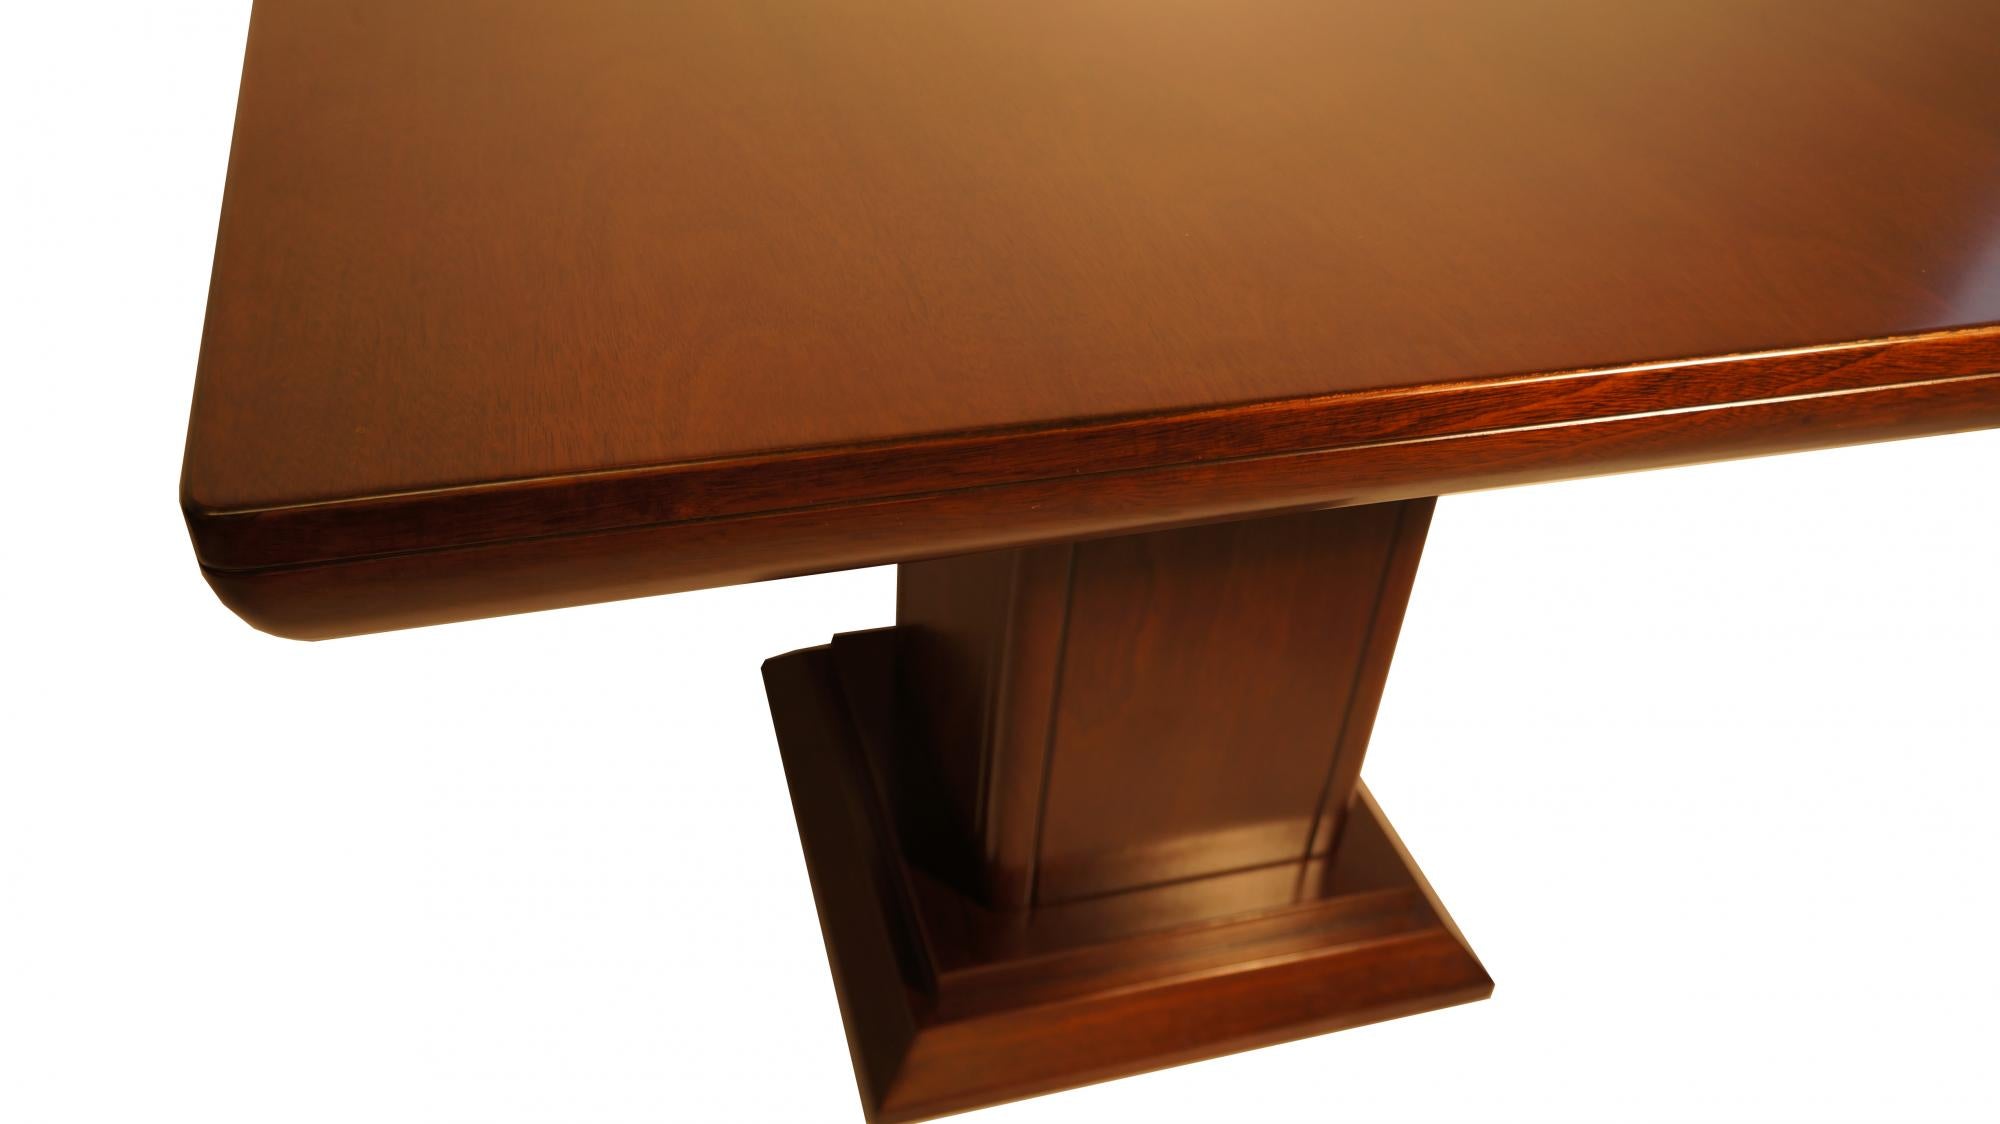 Square Meeting Table One Central Leg - LAT-MET-KT0911